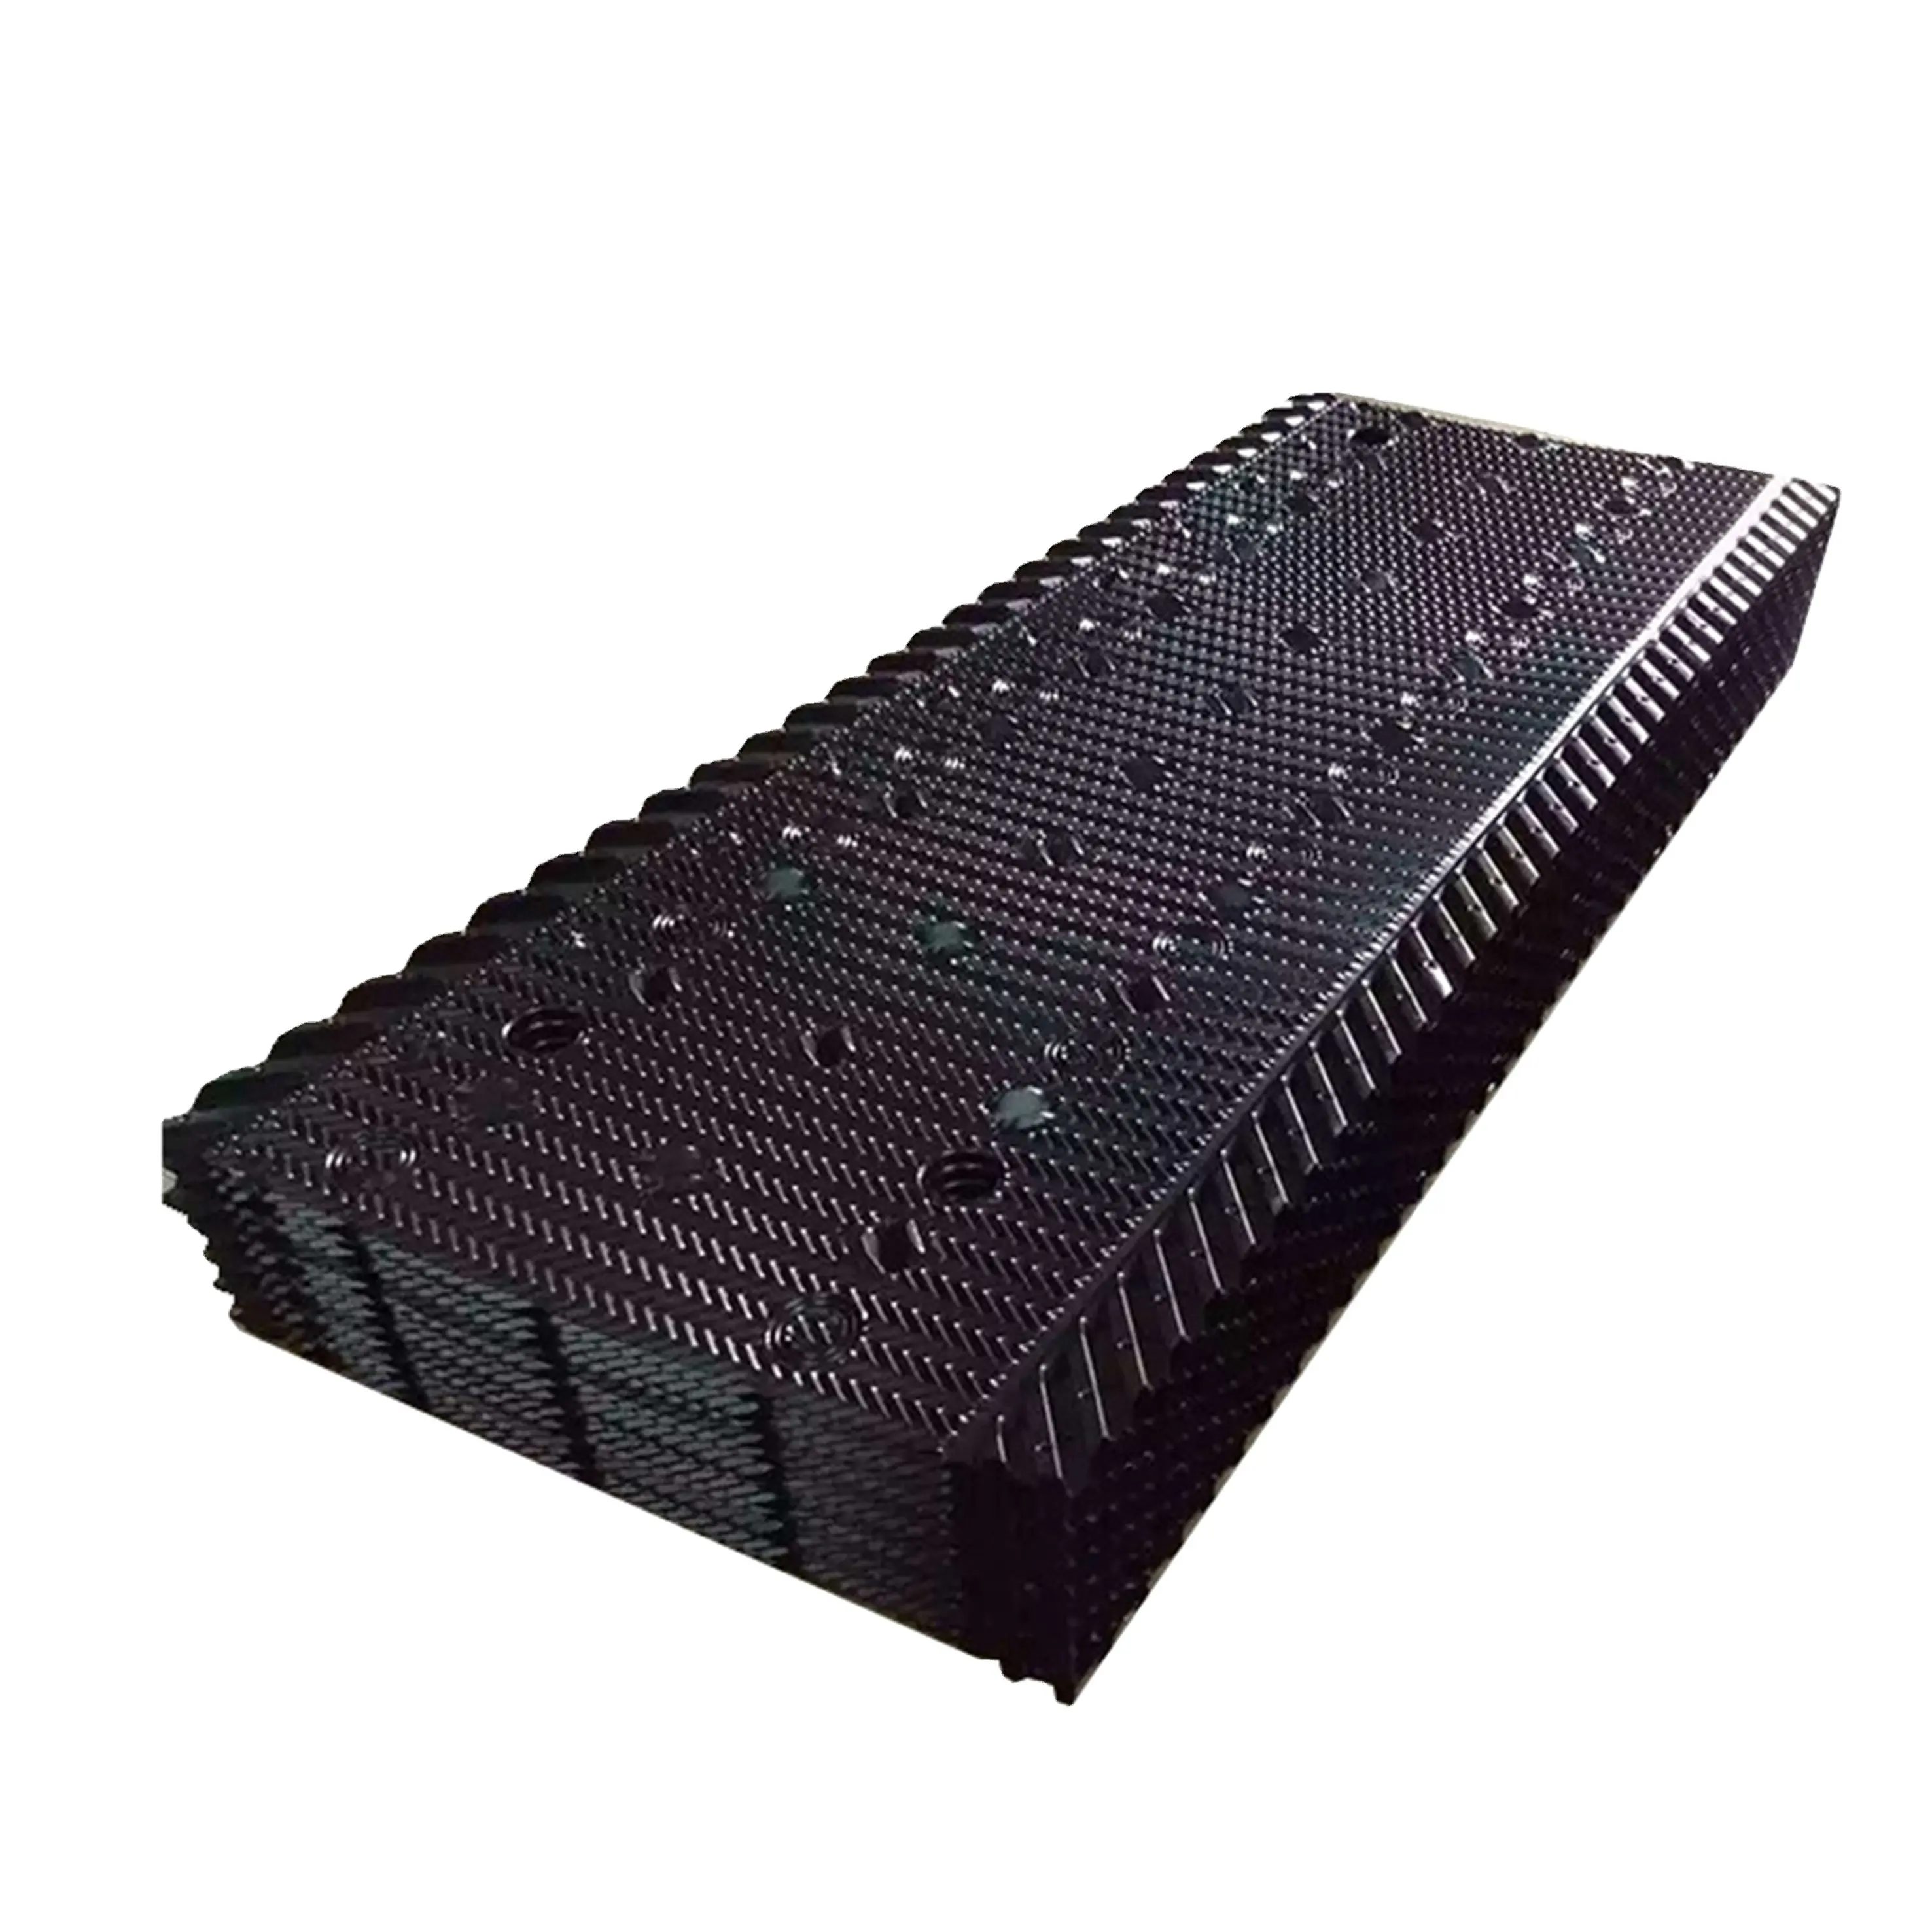 Pvc Fill Cooling Tower High Quality PVC Black Cooling Tower Mx75 Film Fill Media Material New 915mm 1220mm 1520mm Marley Cooling Tower Fill